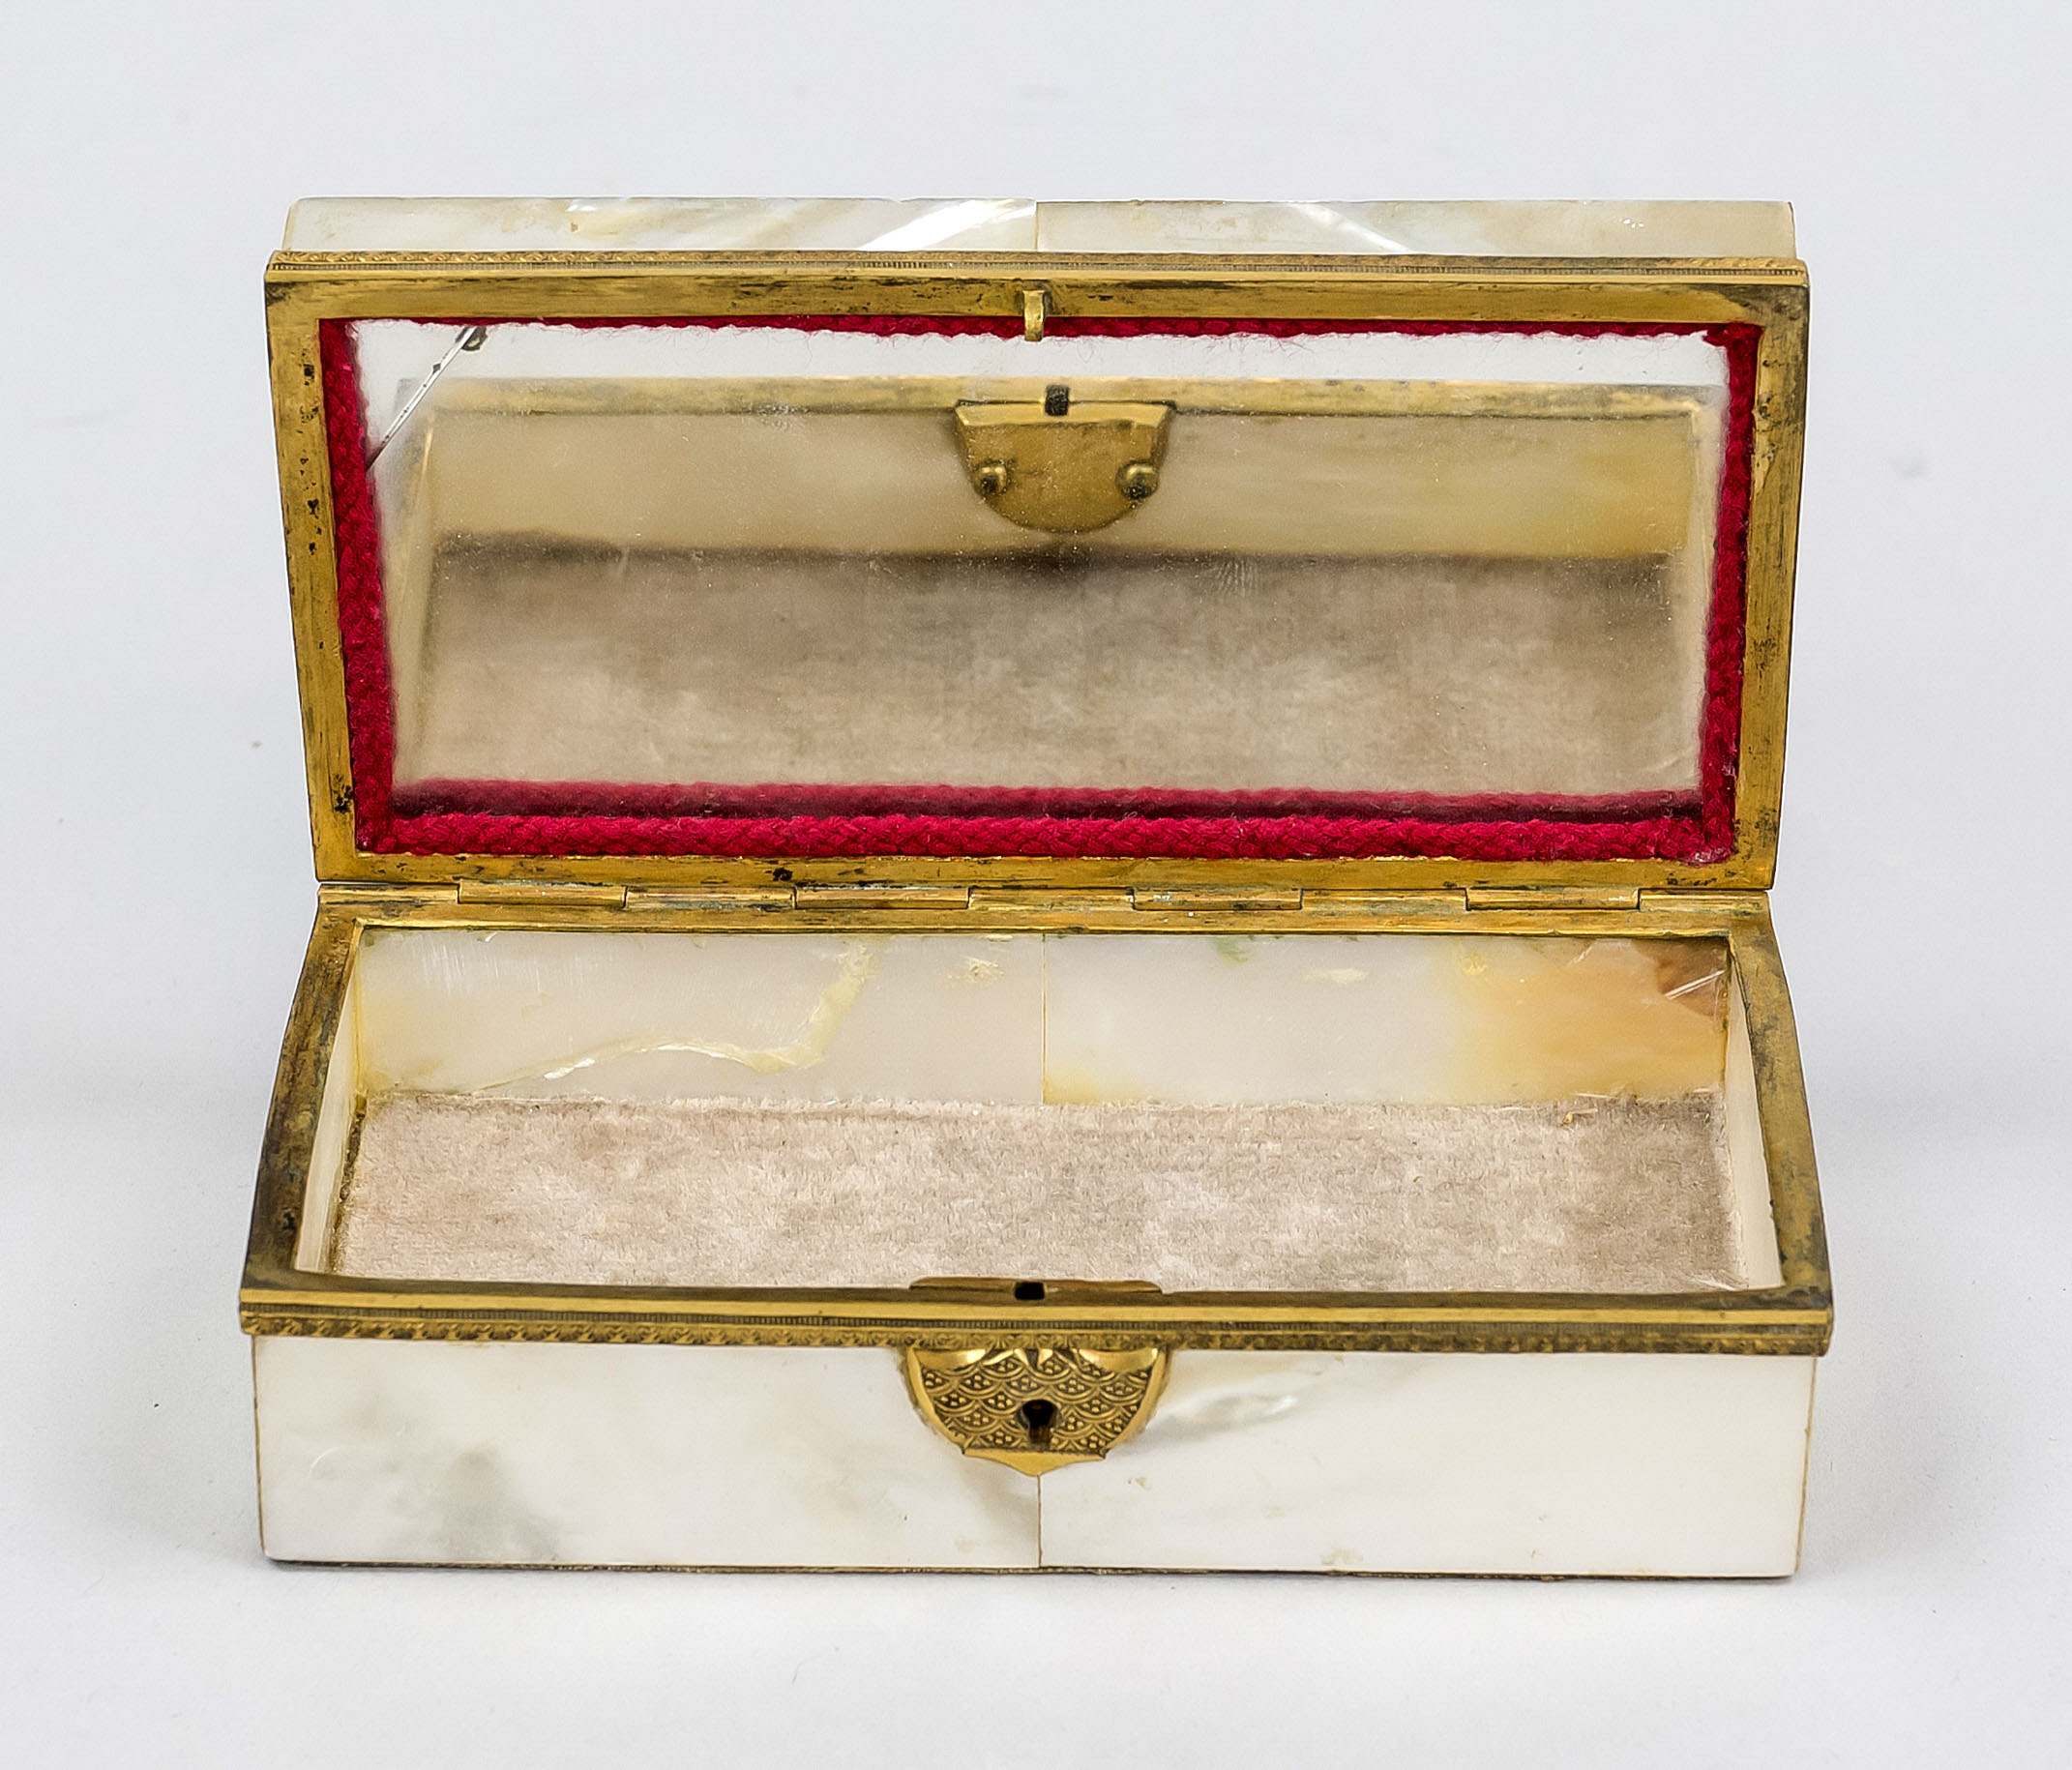 Hinged lid box with miniature painting, 19th century, gilded brass frame, inlaid all around with - Image 2 of 2